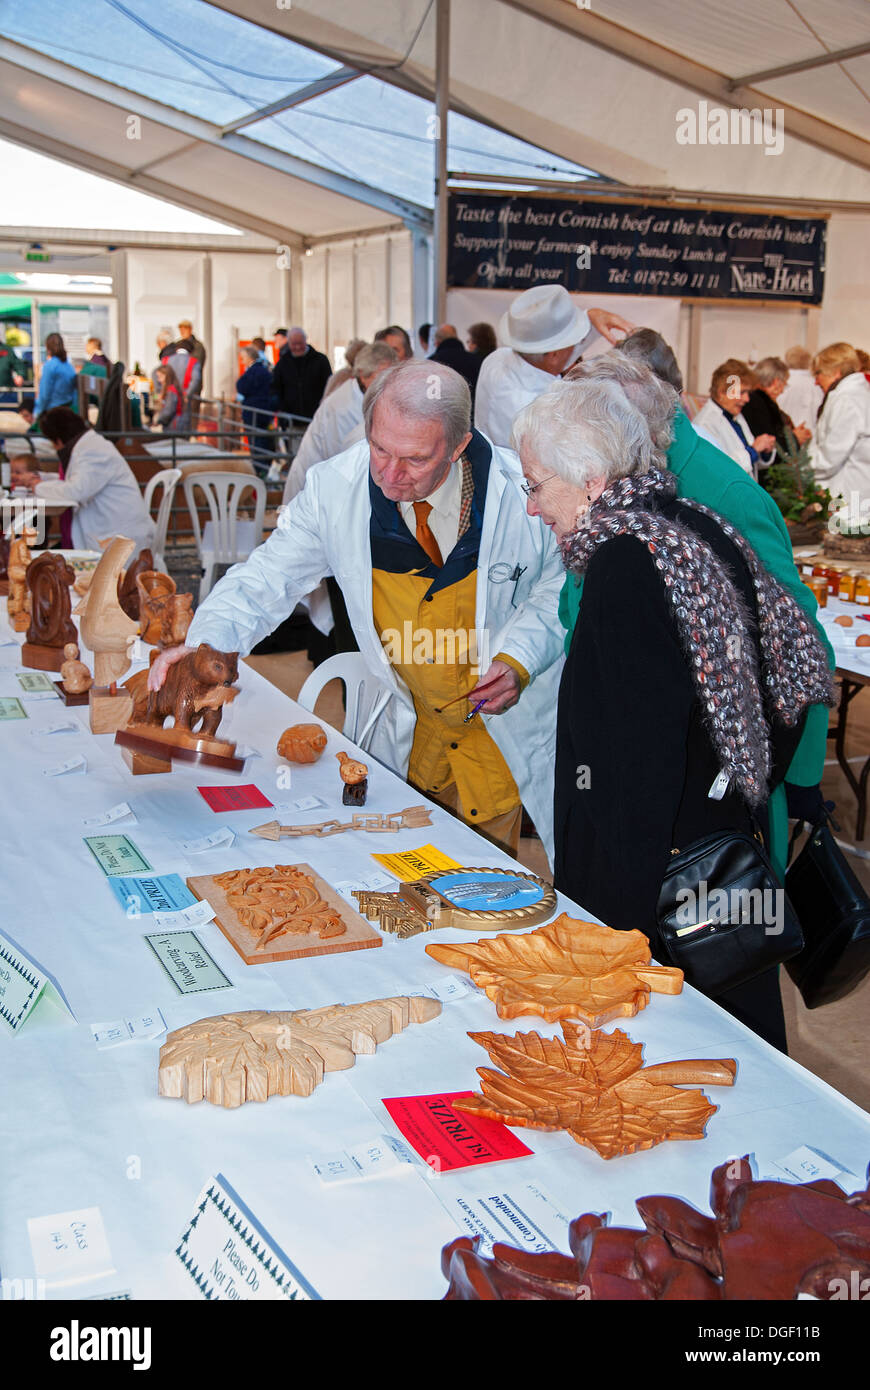 a judge looking at the exhibits at a craft fair in truro, cornwall, uk Stock Photo